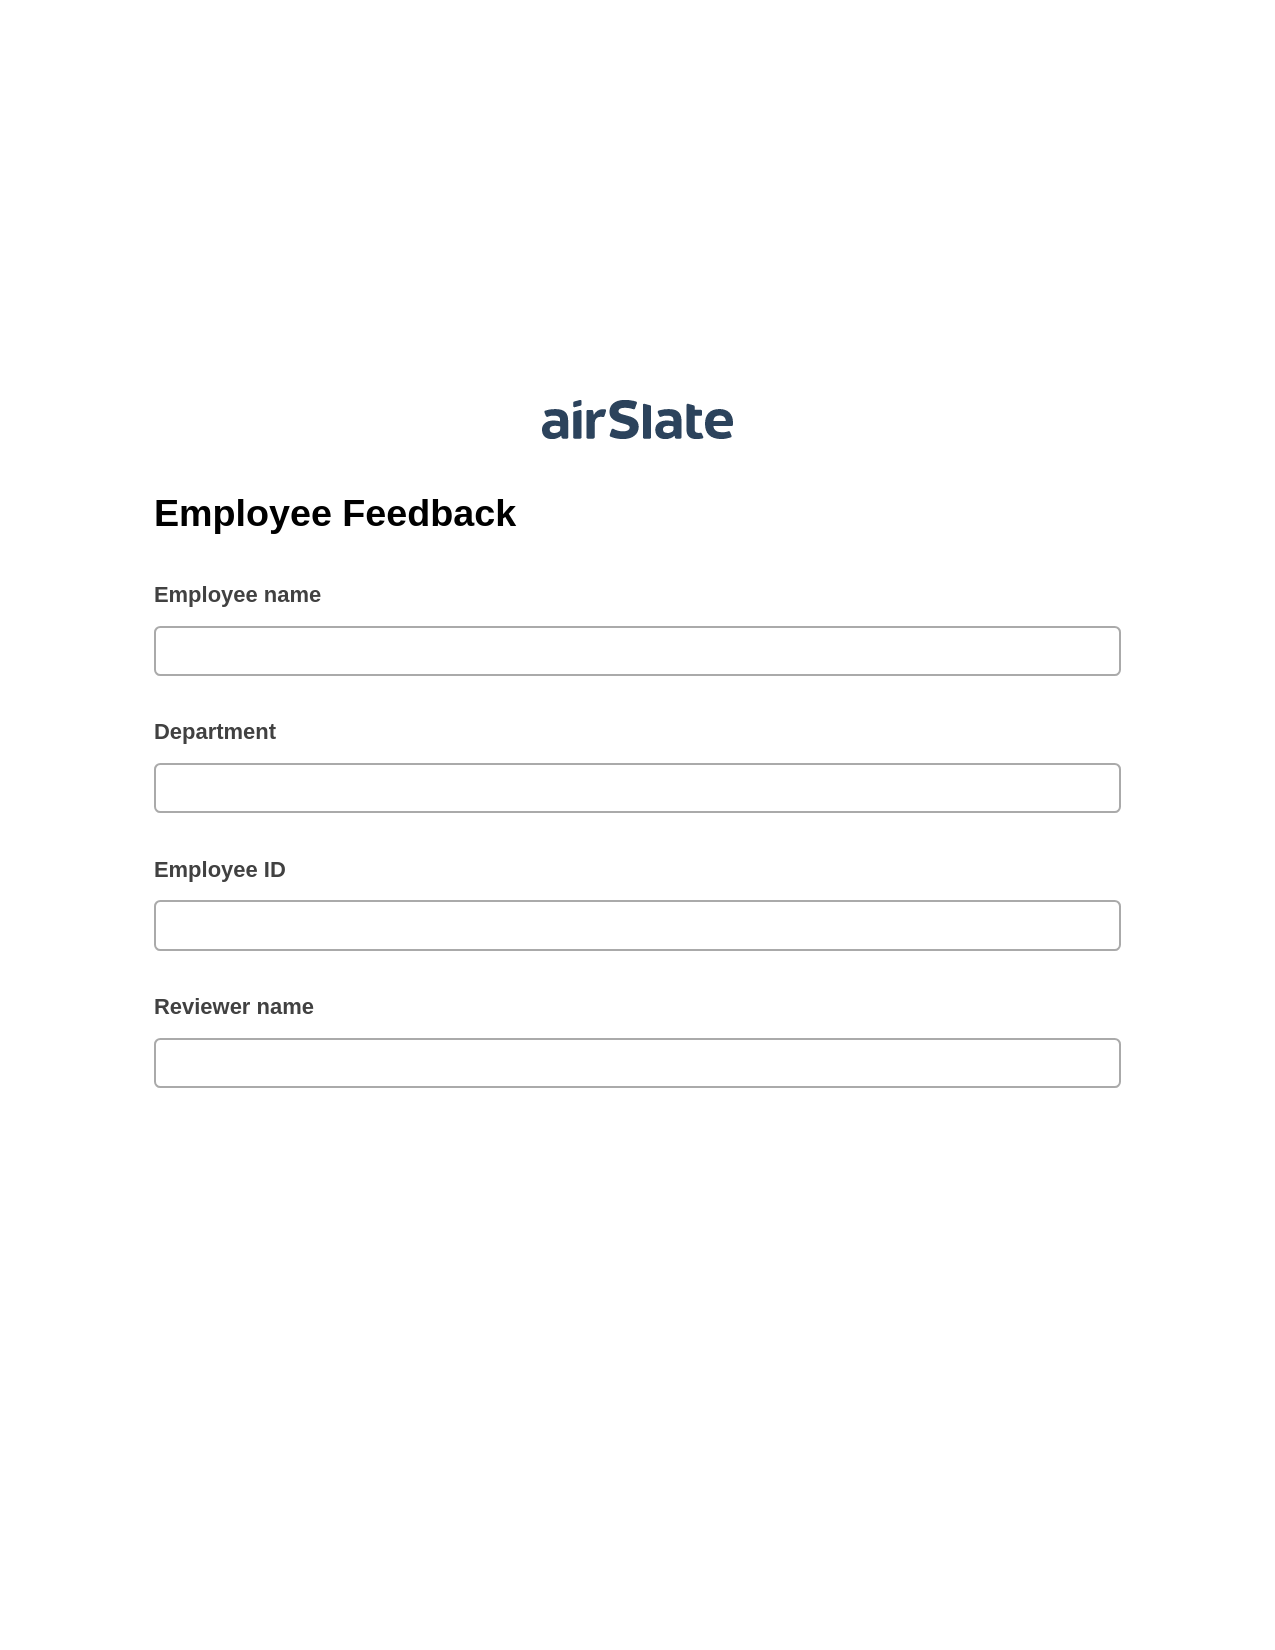 Employee Feedback Pre-fill from Salesforce Record Bot, System Bot - Create a Slate in another Flow, Export to Excel 365 Bot